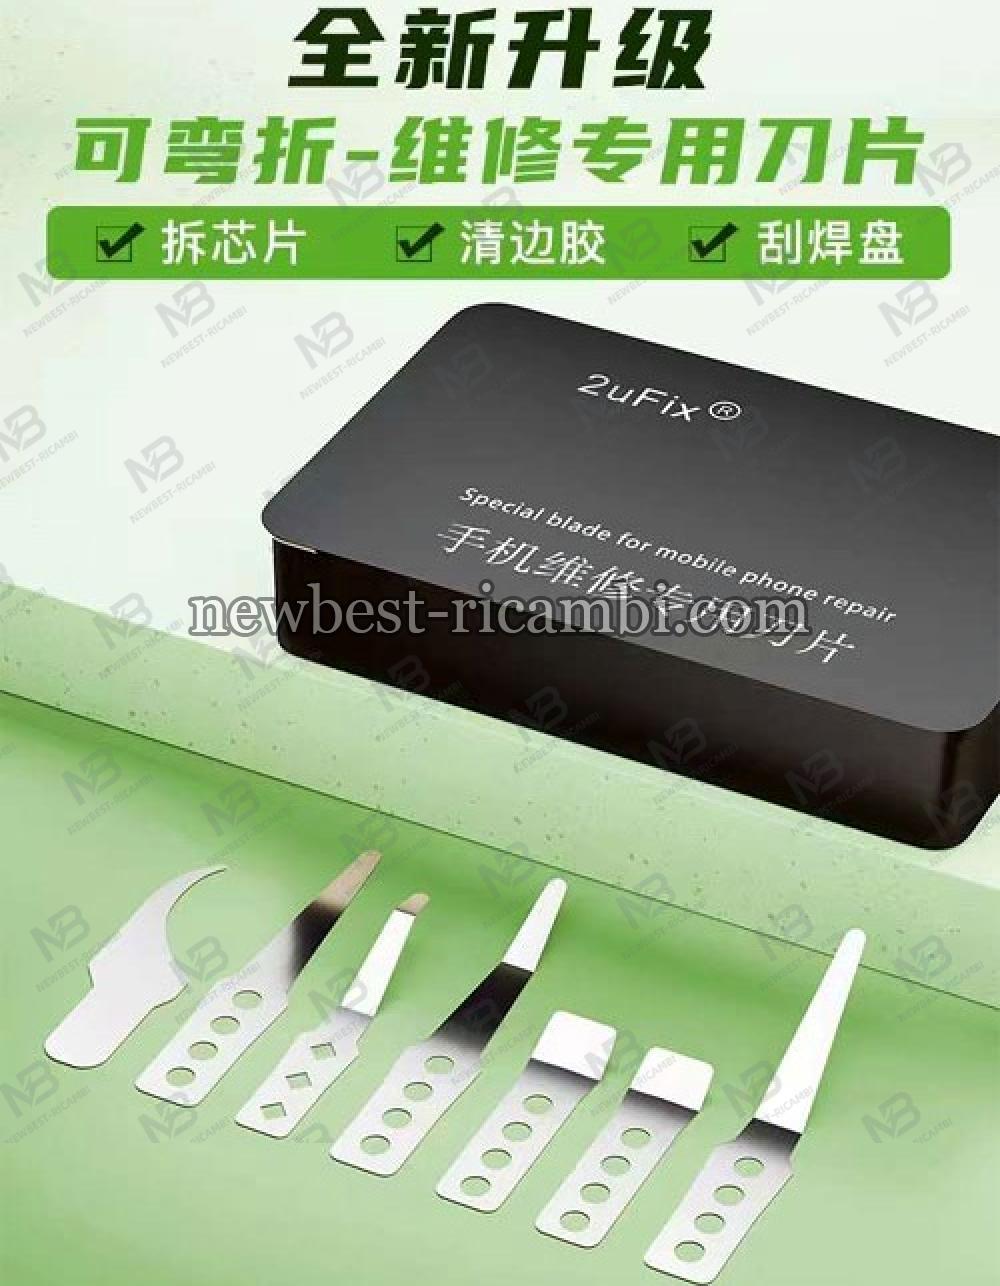 2uFix Special Blade For Mobile Phone Repair